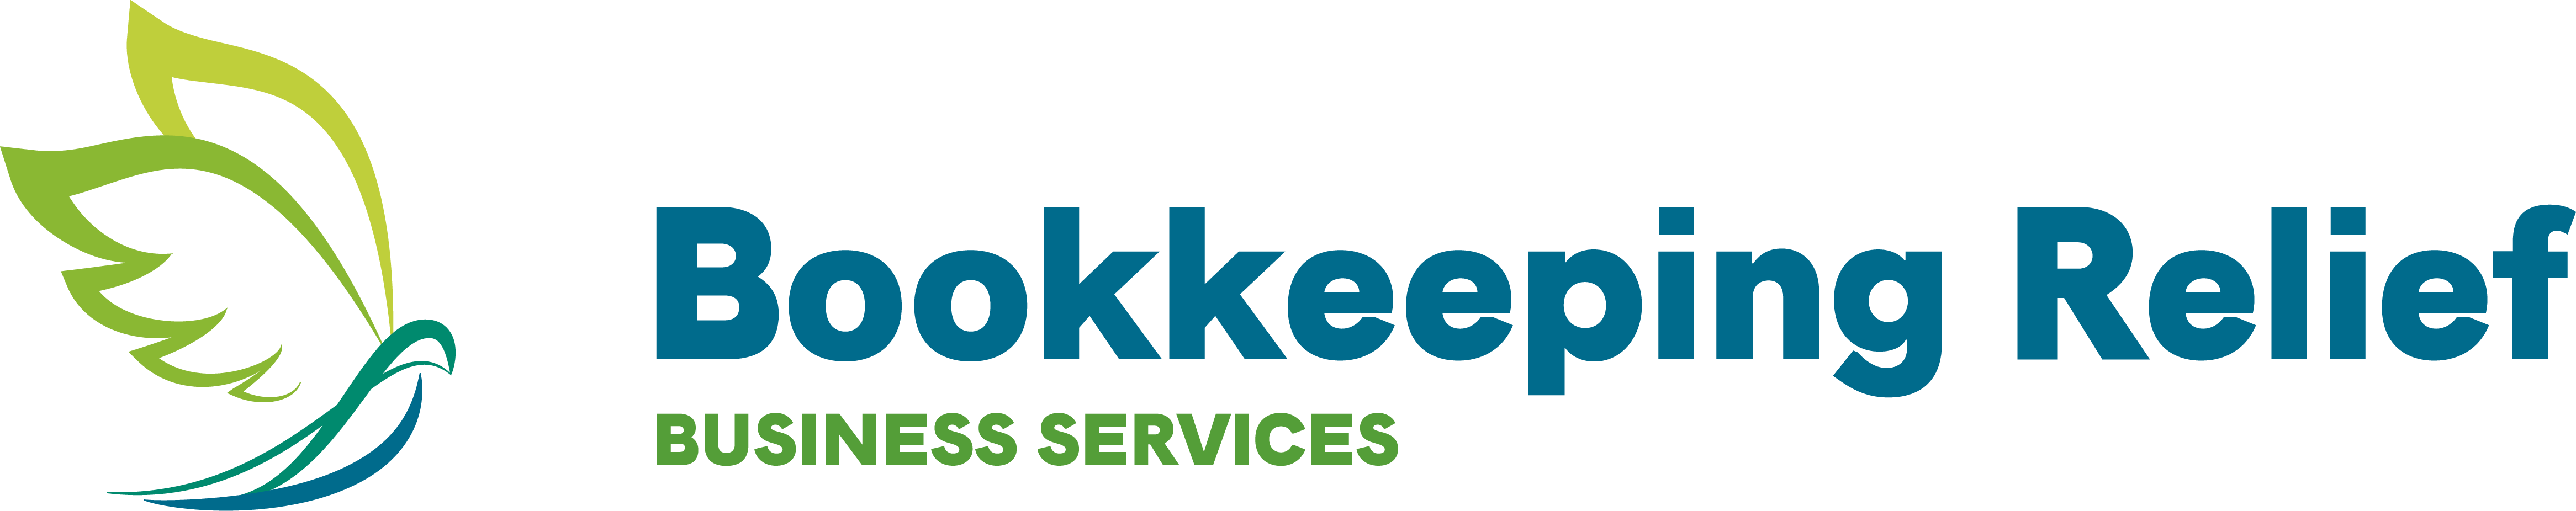 bench bookkeeping logo png